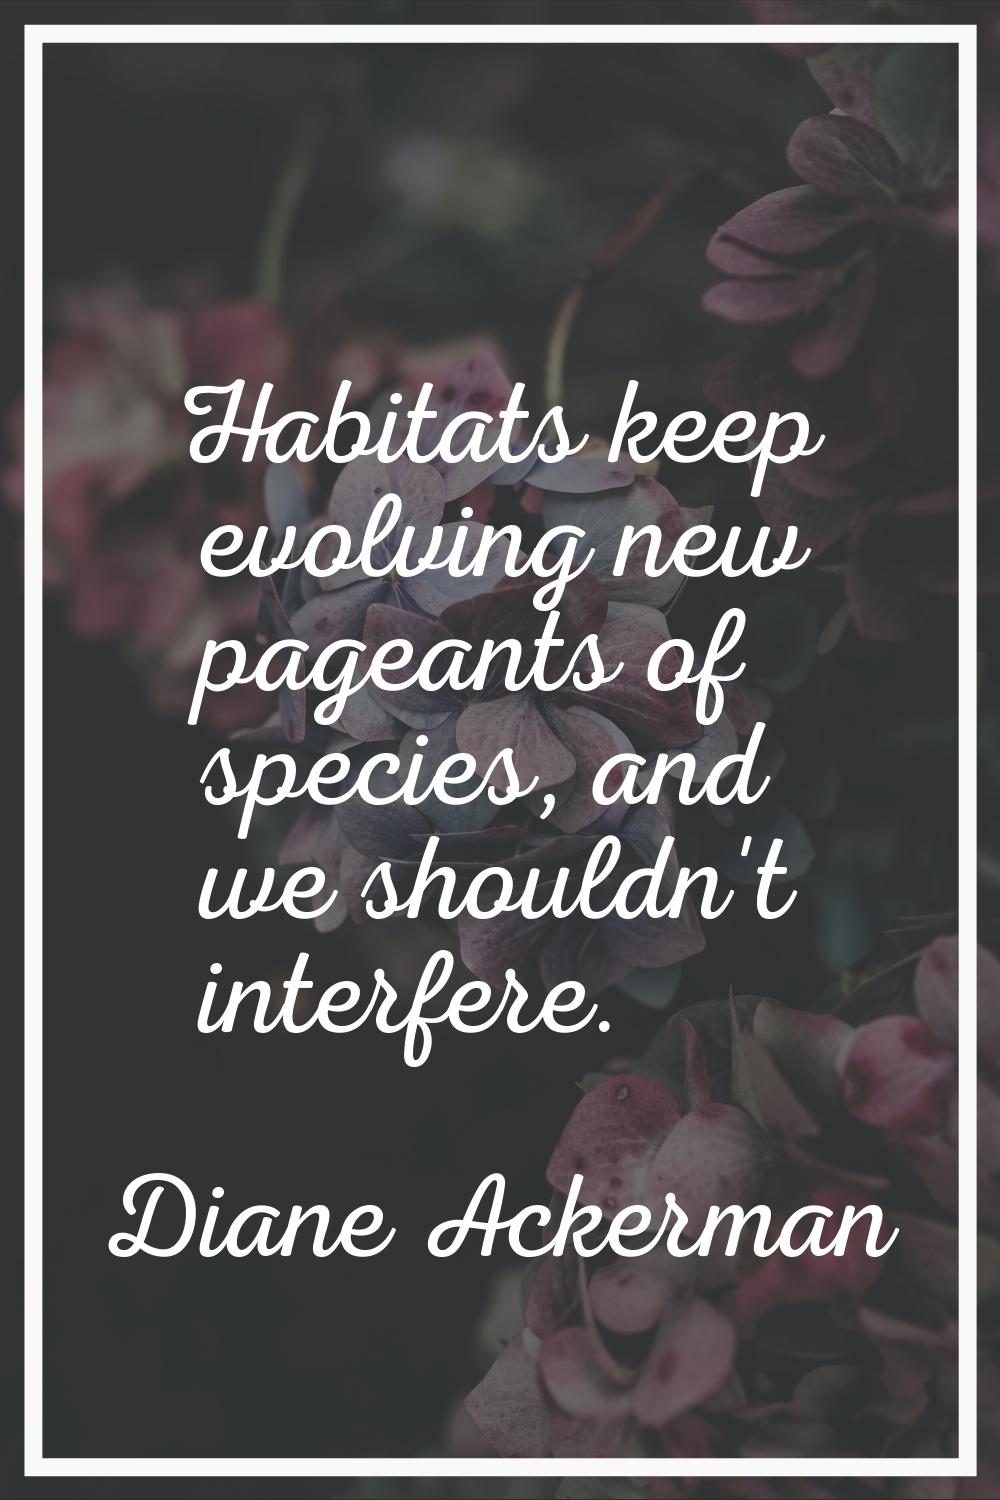 Habitats keep evolving new pageants of species, and we shouldn't interfere.